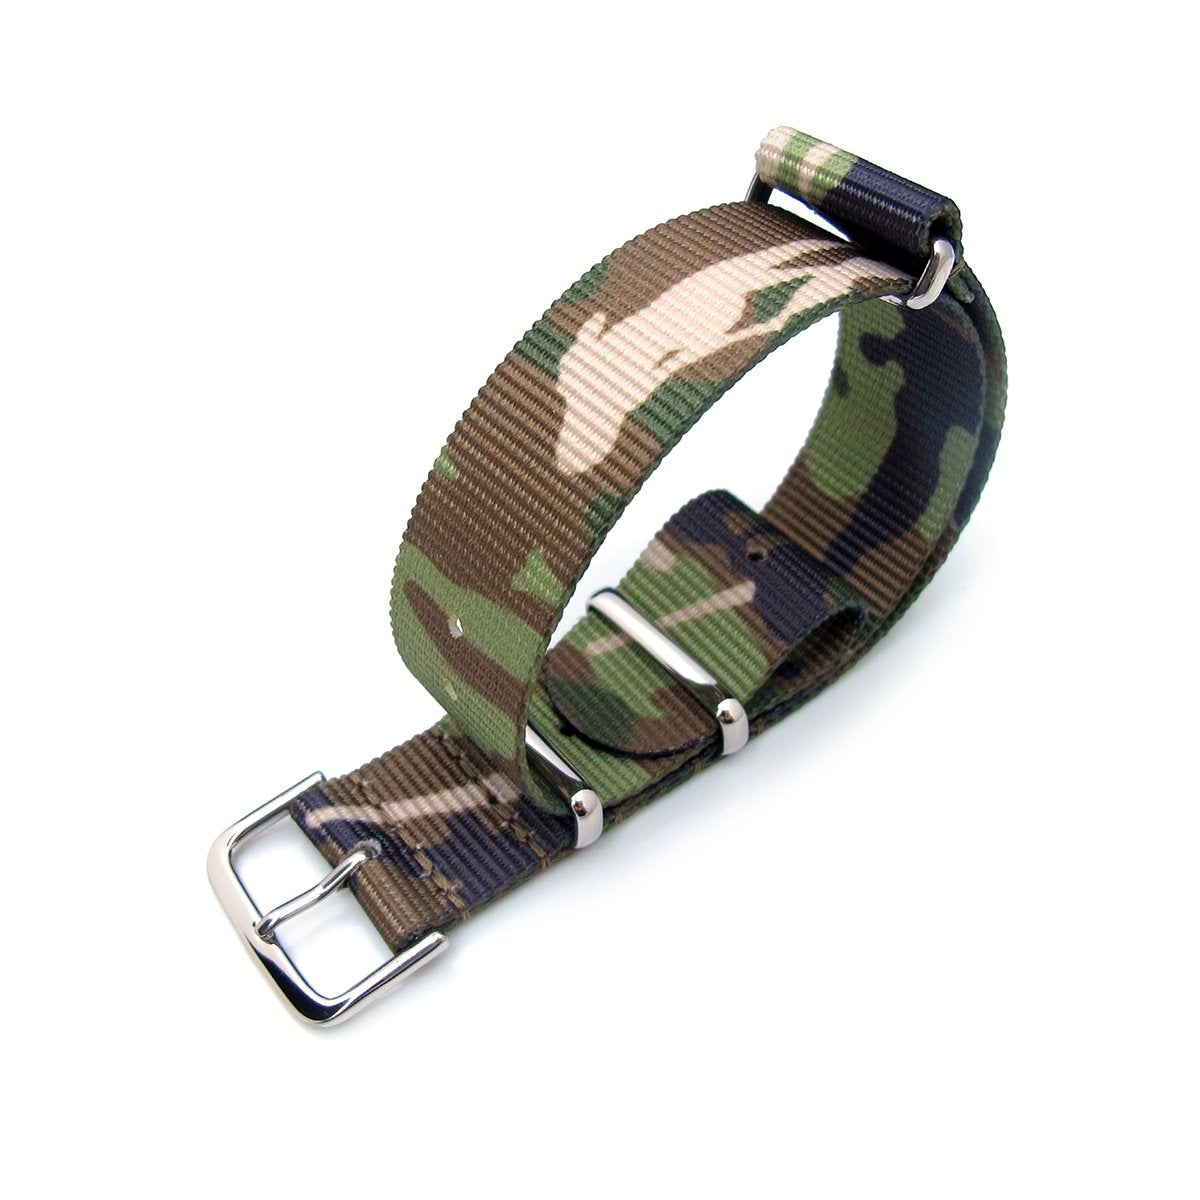 20mm NATO G10 Nylon Military Watch Strap Woodland Camouflage Polished Strapcode Watch Bands